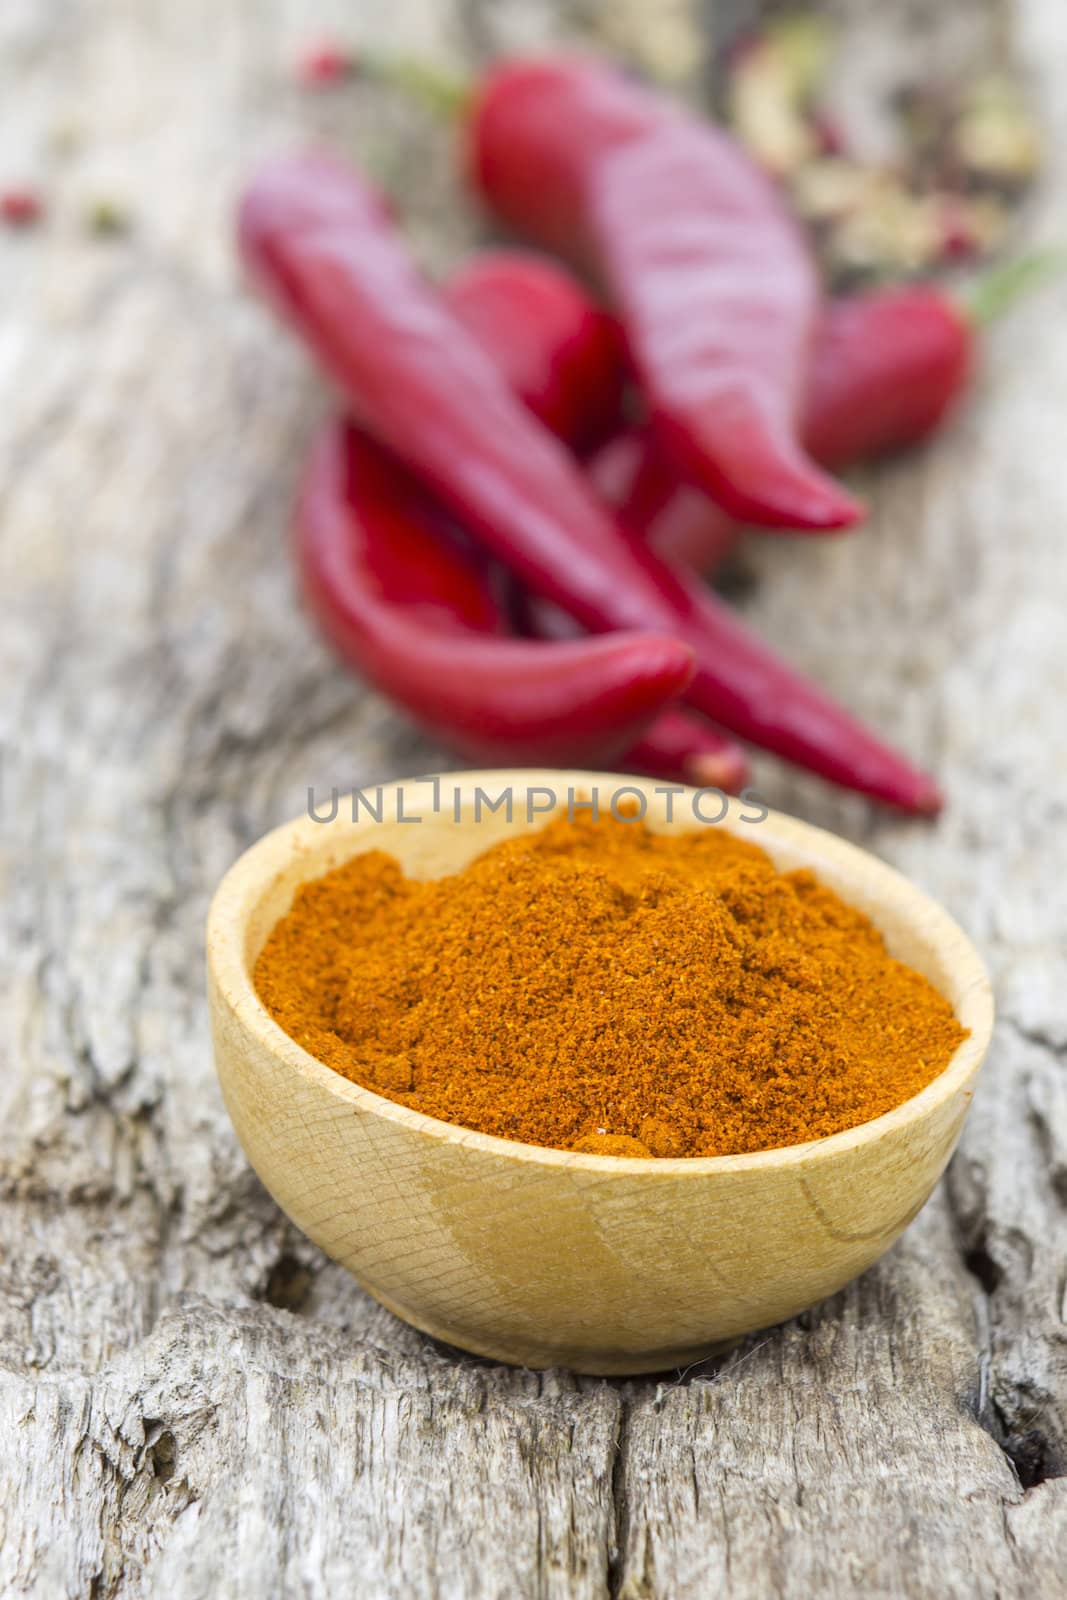 red chili powder with red chilies